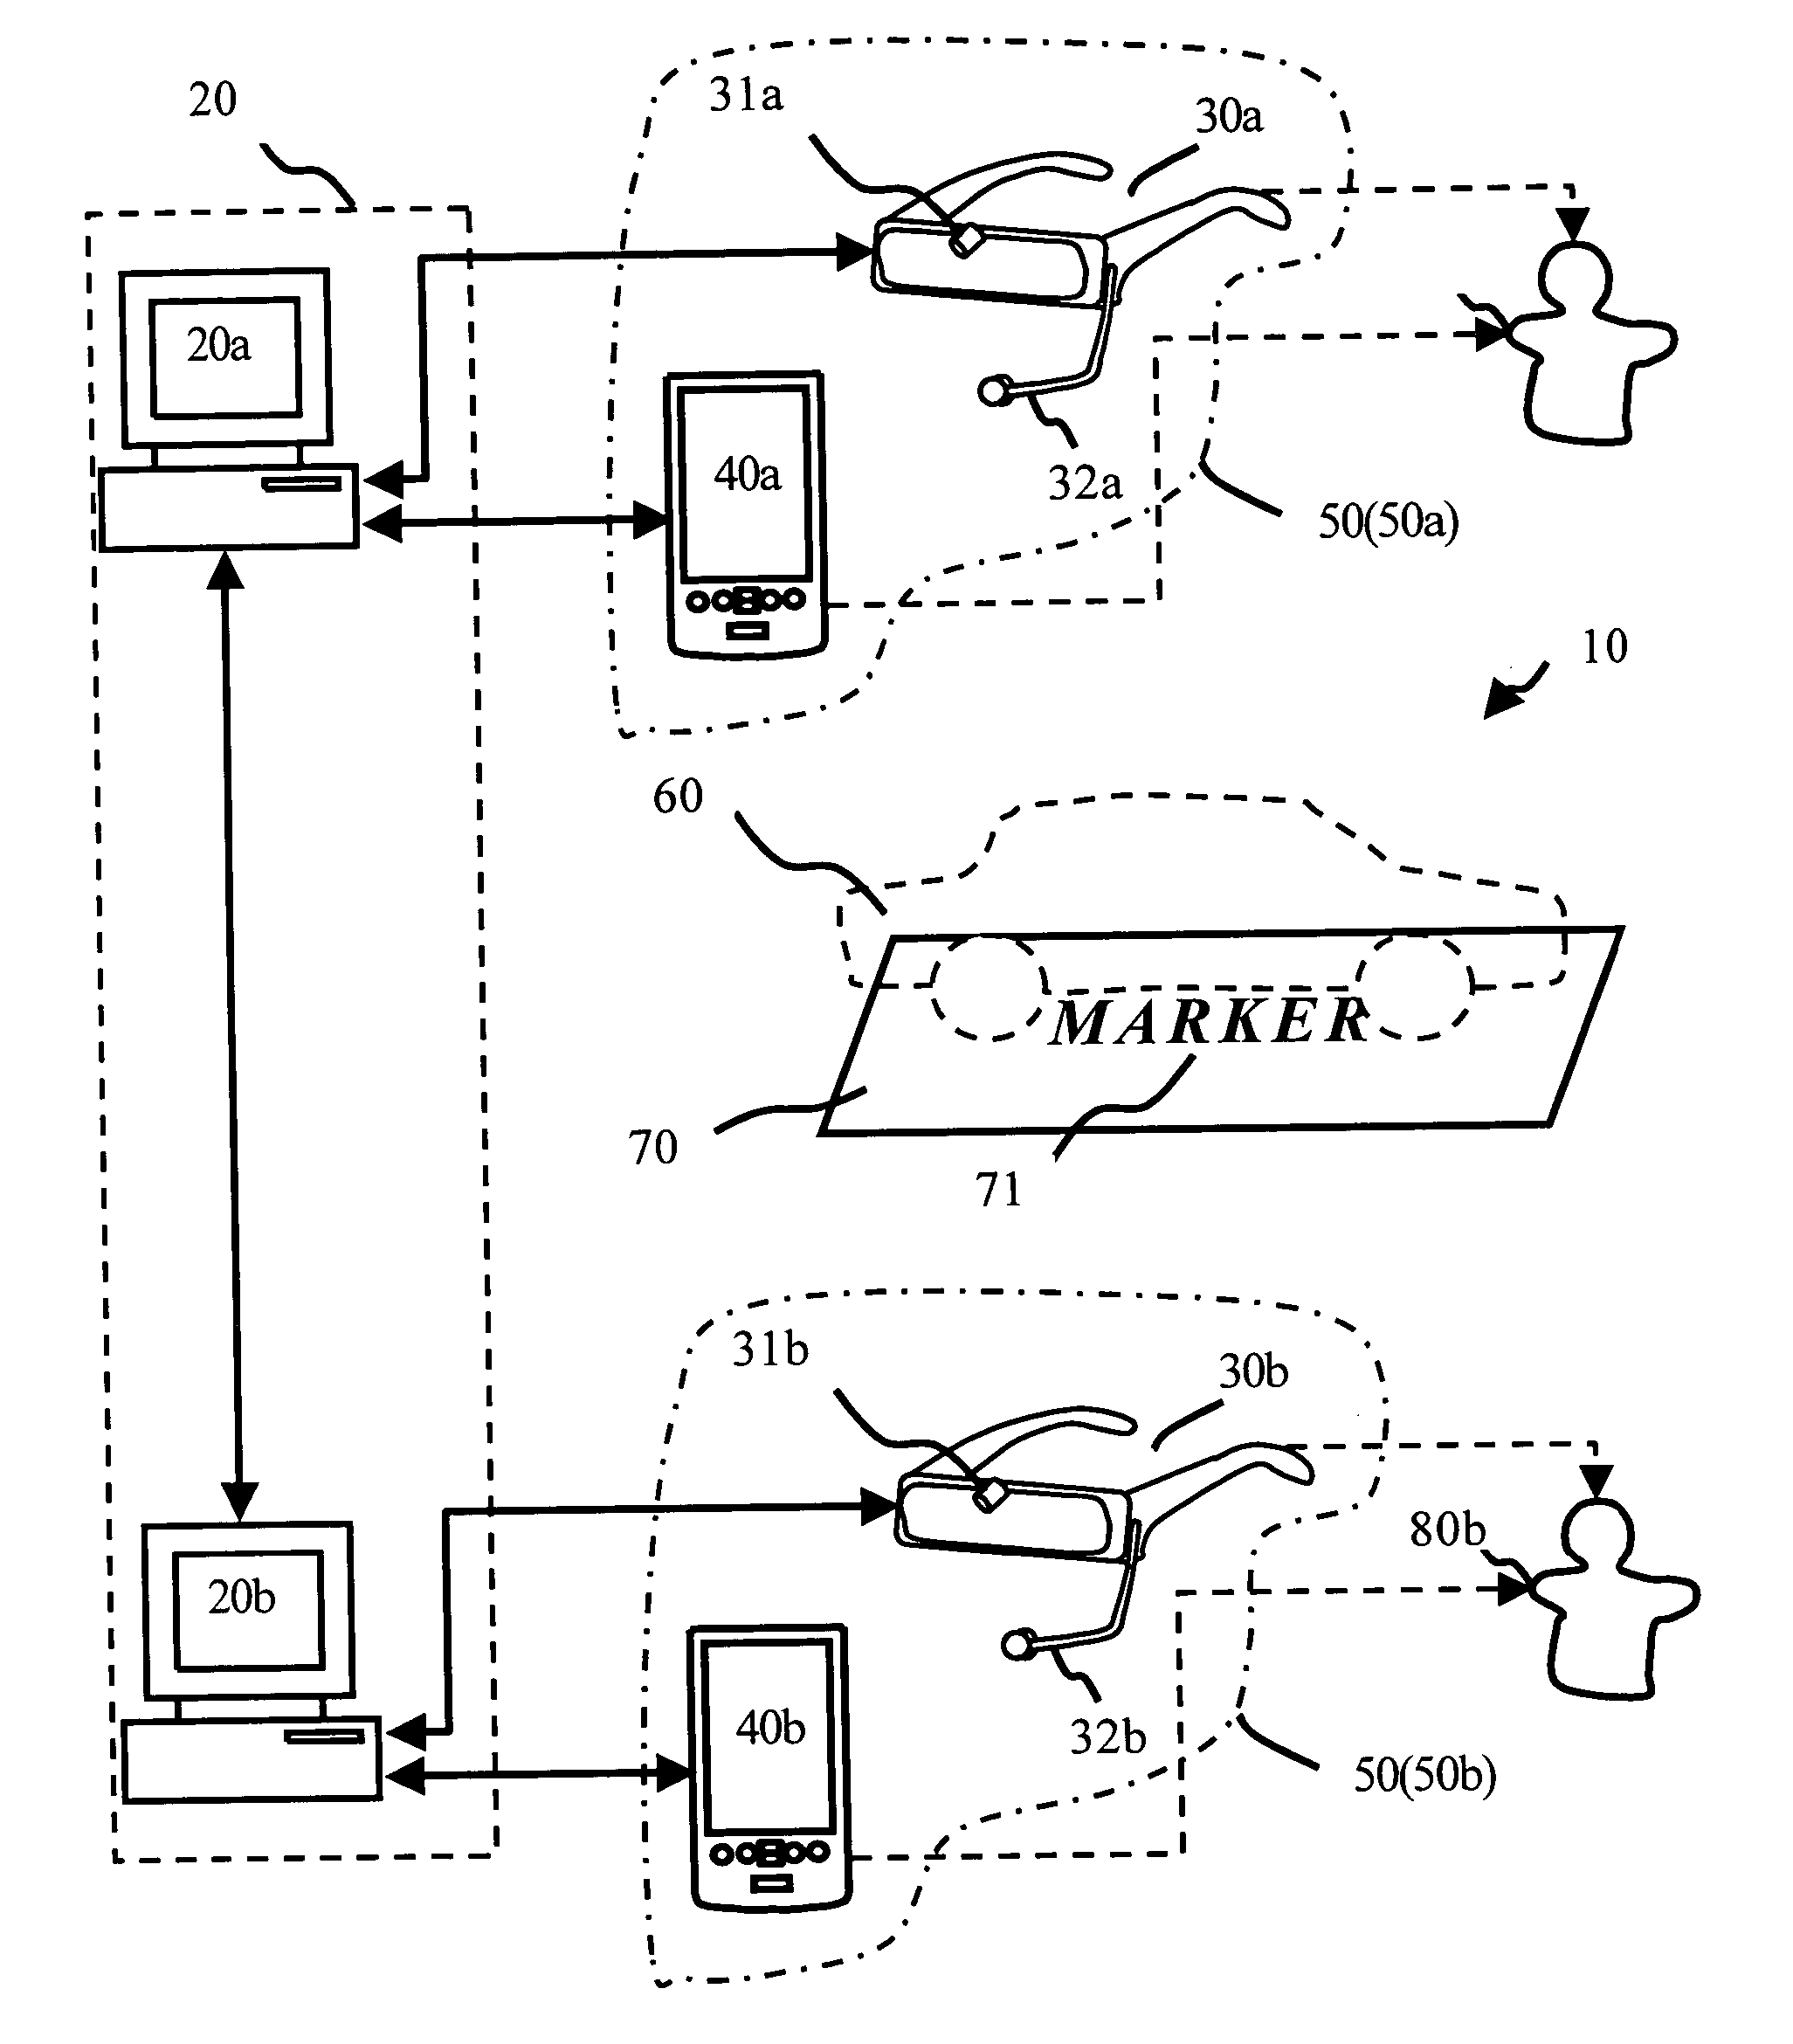 Augmented reality system and method with mobile and interactive function for multiple users